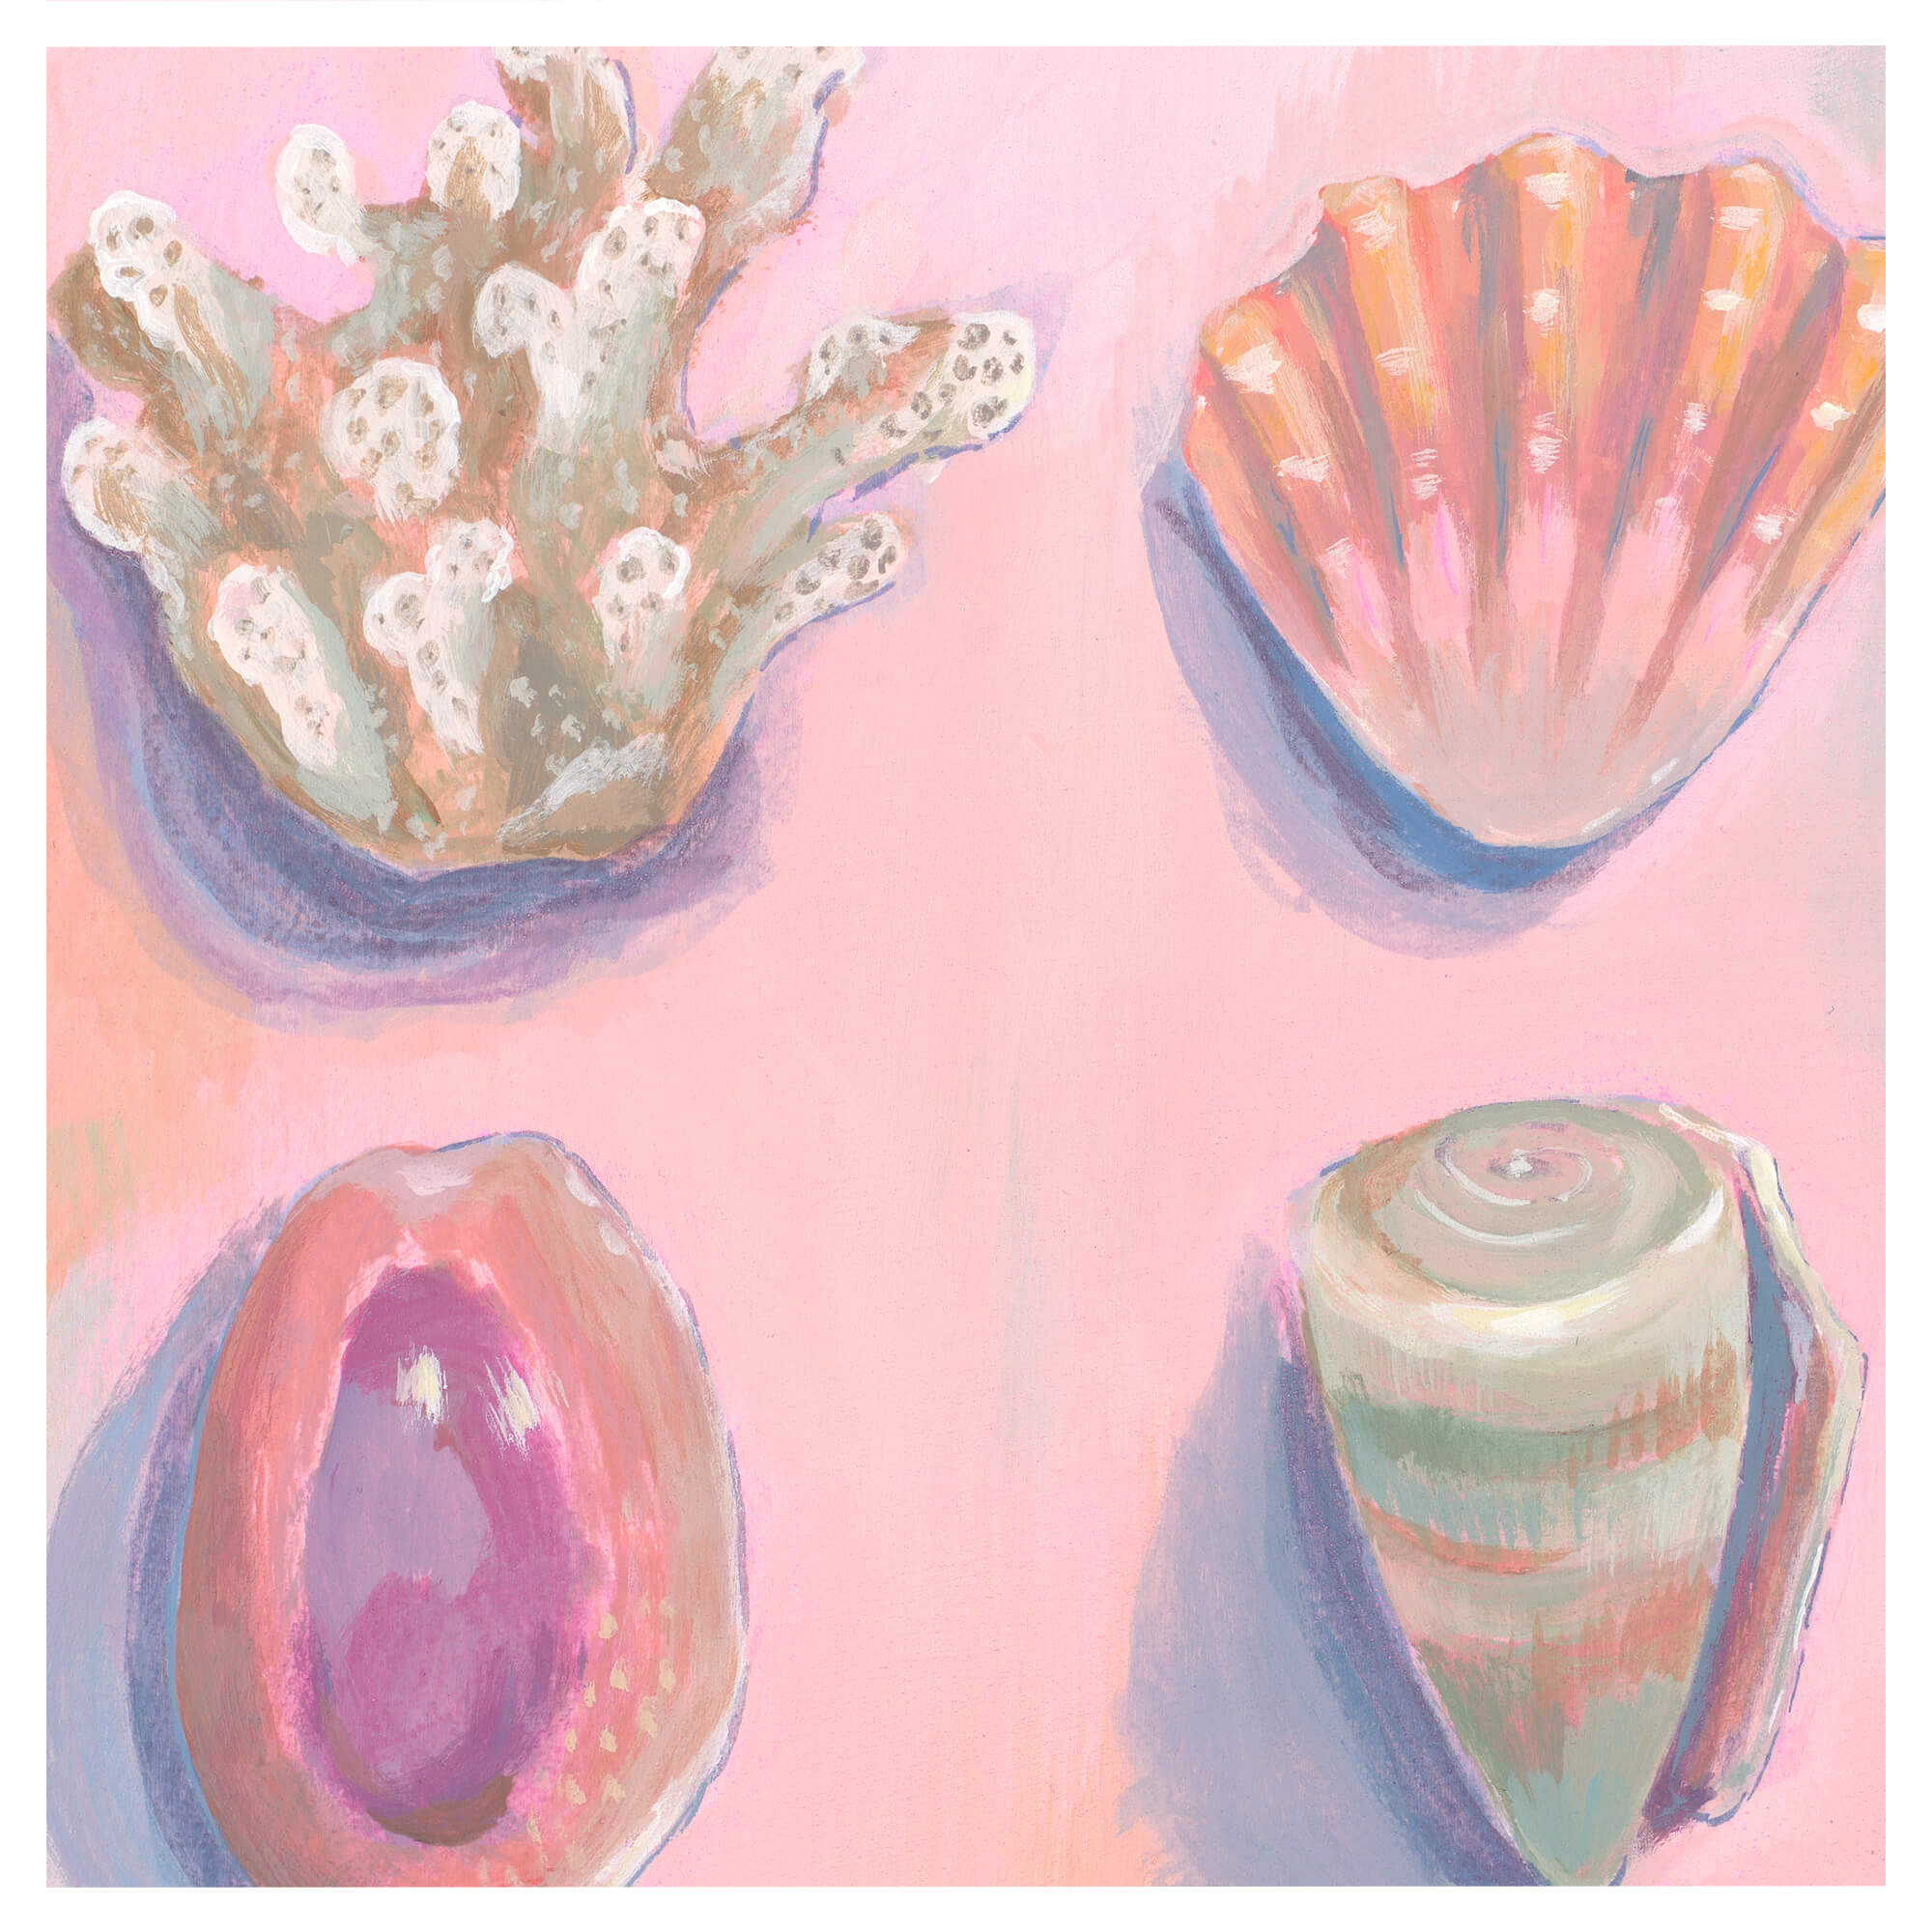 Different kinds of seashells on a pink-hued background by Hawaii artist Lindsay Wilkins